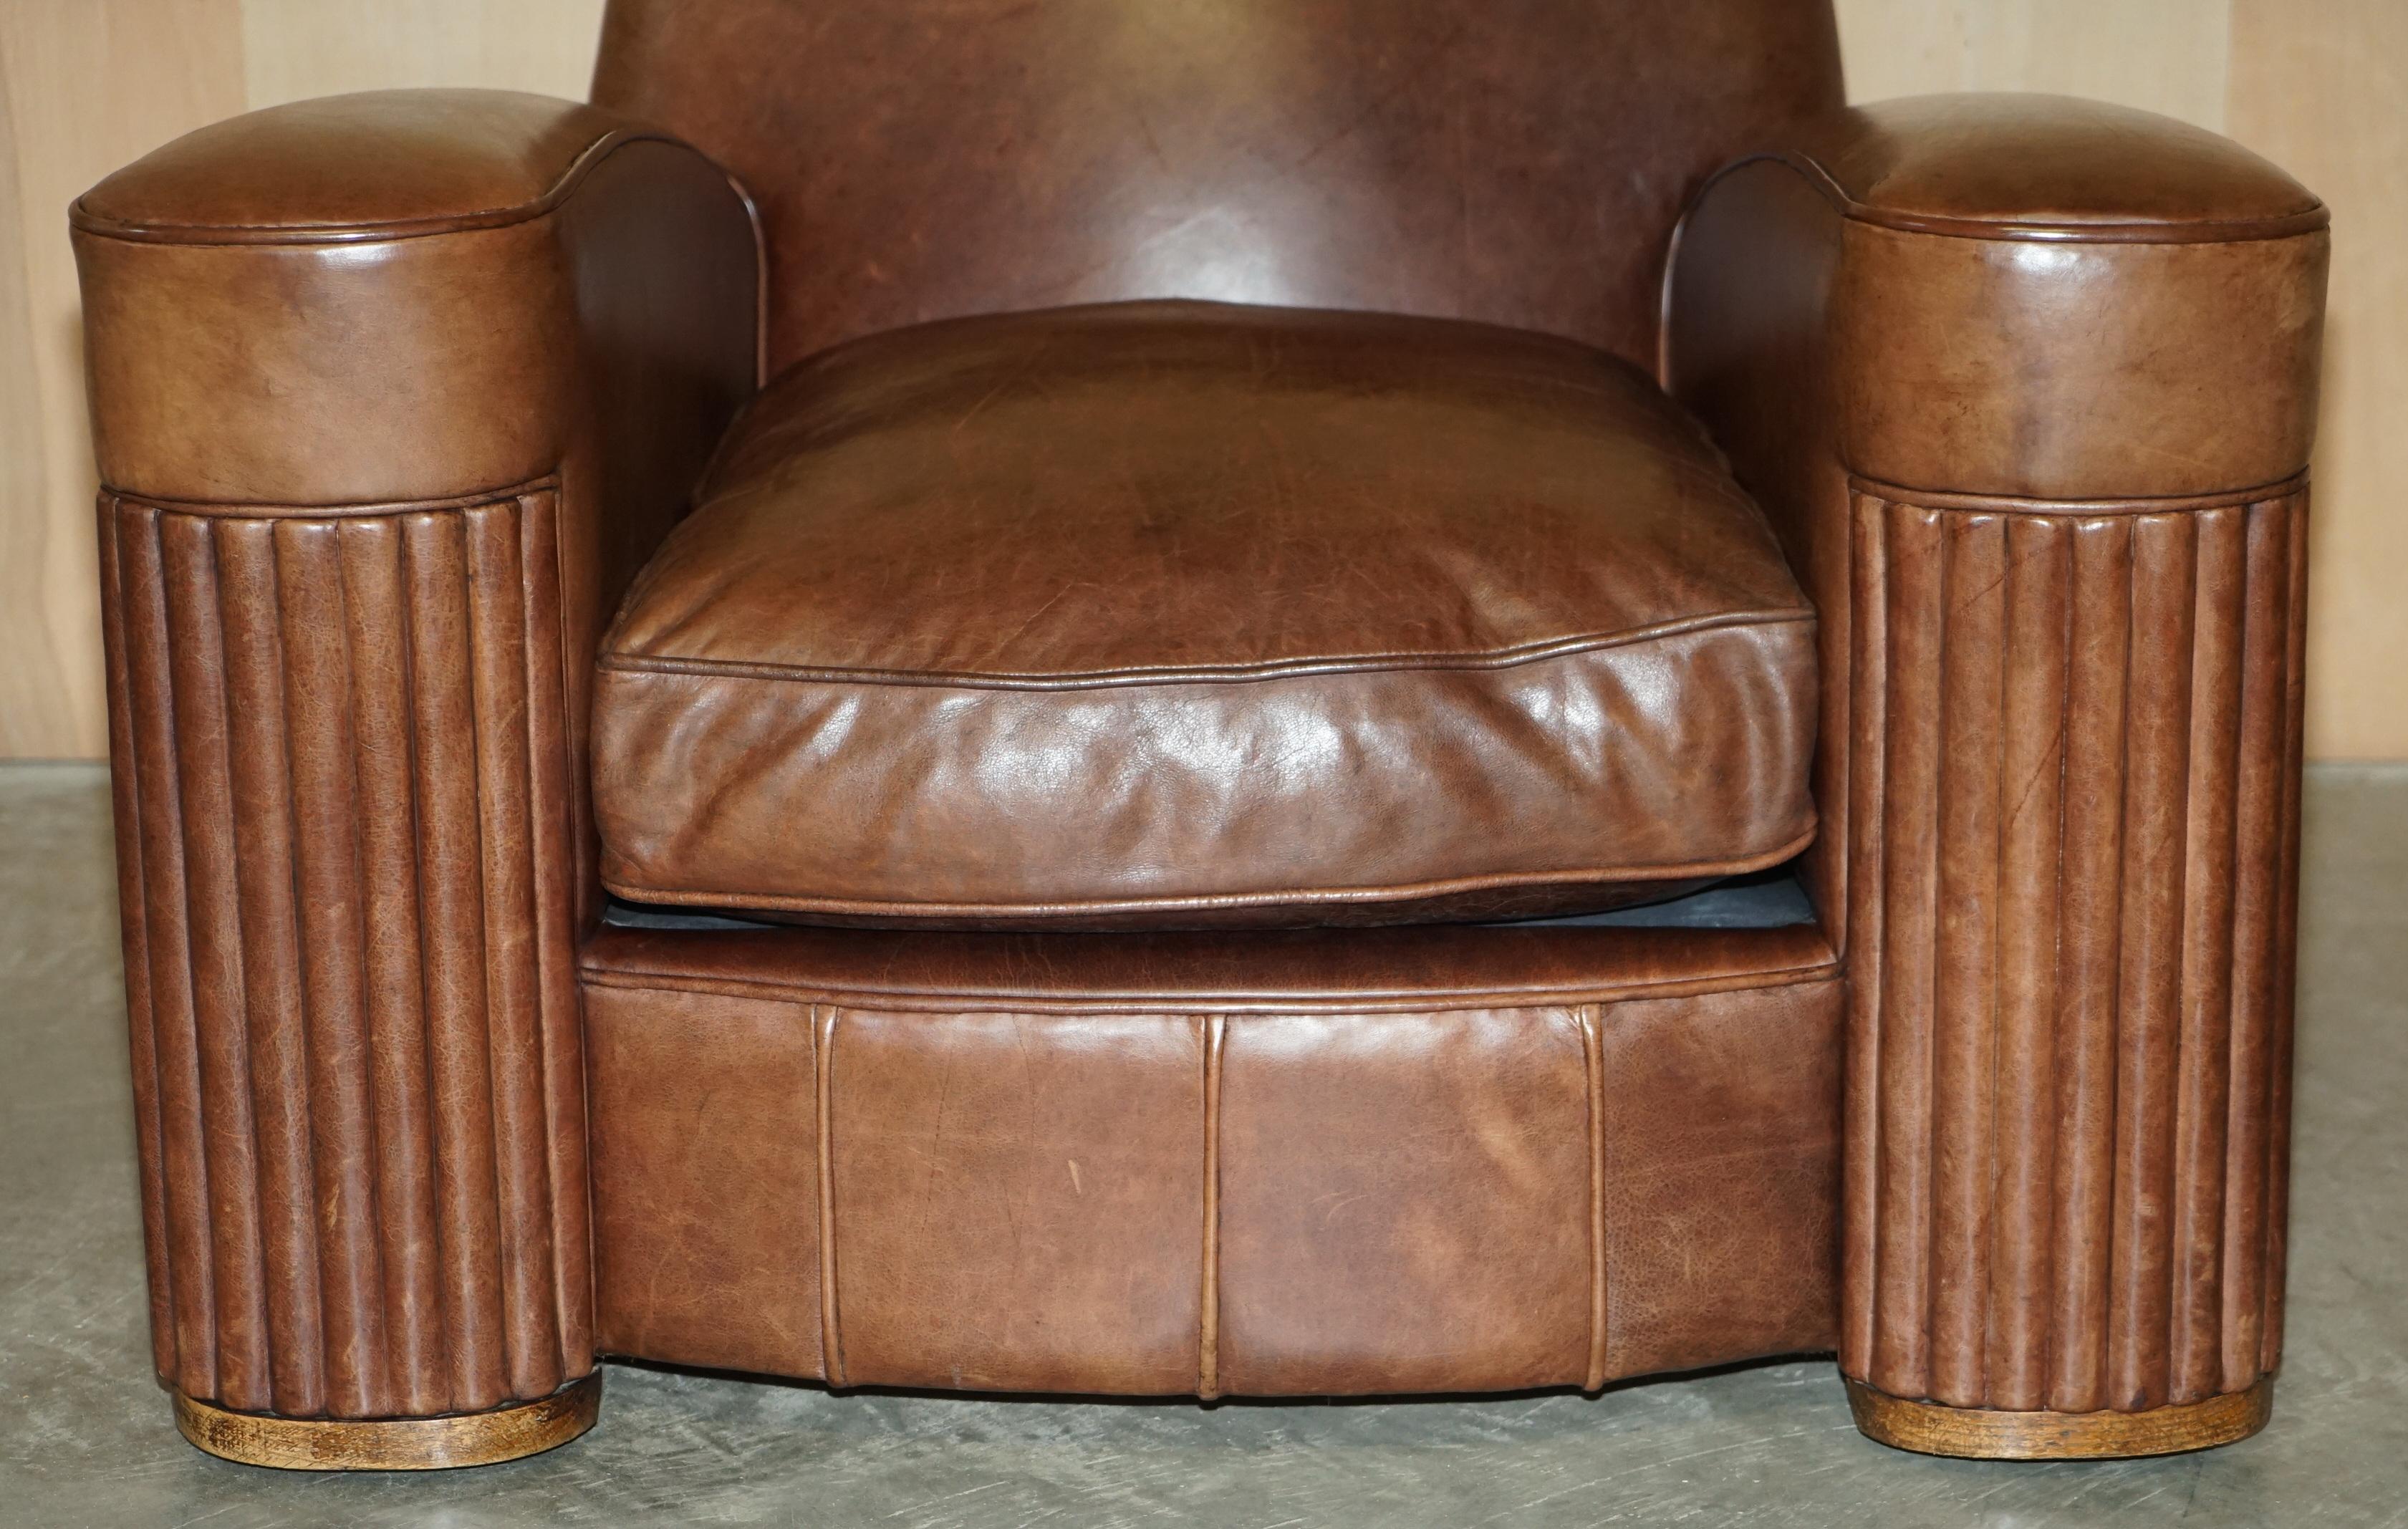 Hand-Crafted STUNNING PAIR OF ORIGINAL ART DECO HERITAGE BROWN LEATHER CIRCA 1920'S ARMCHAIRs For Sale